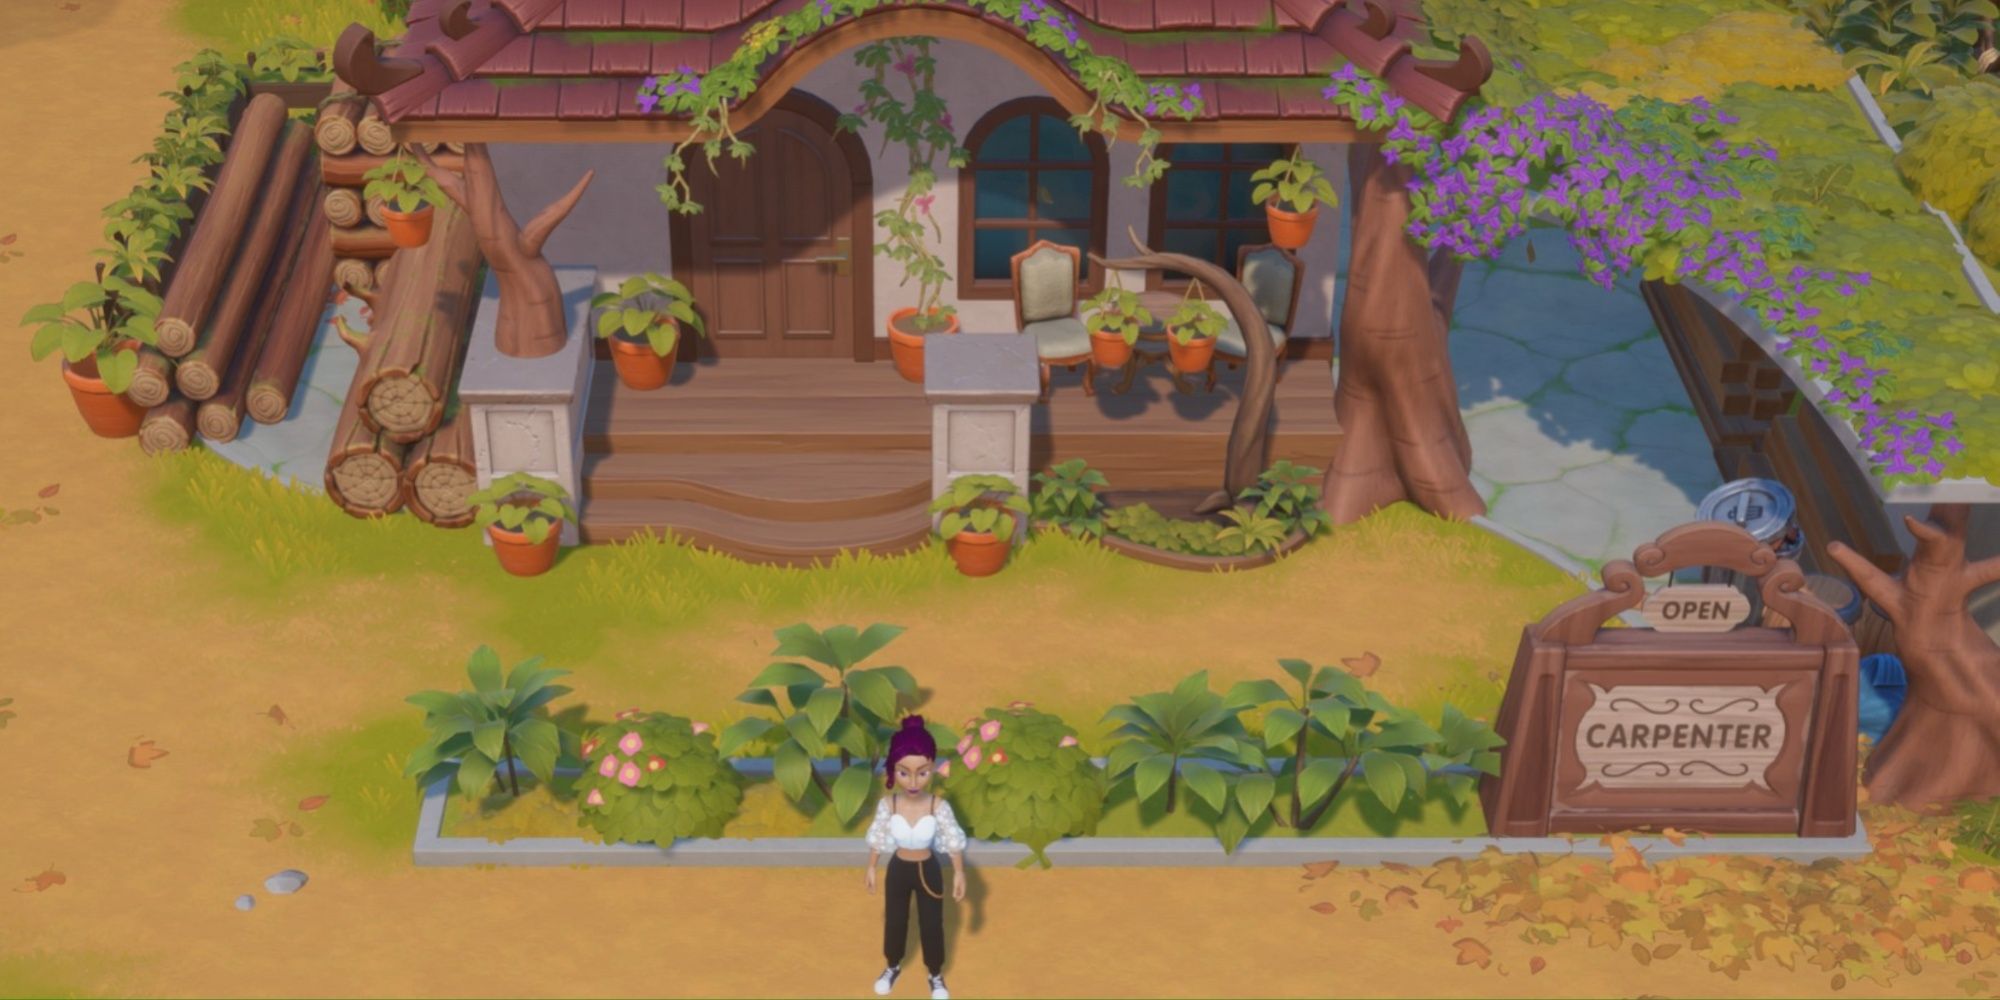 Coral Island: An image of the player character standing in front of the carpentry shop